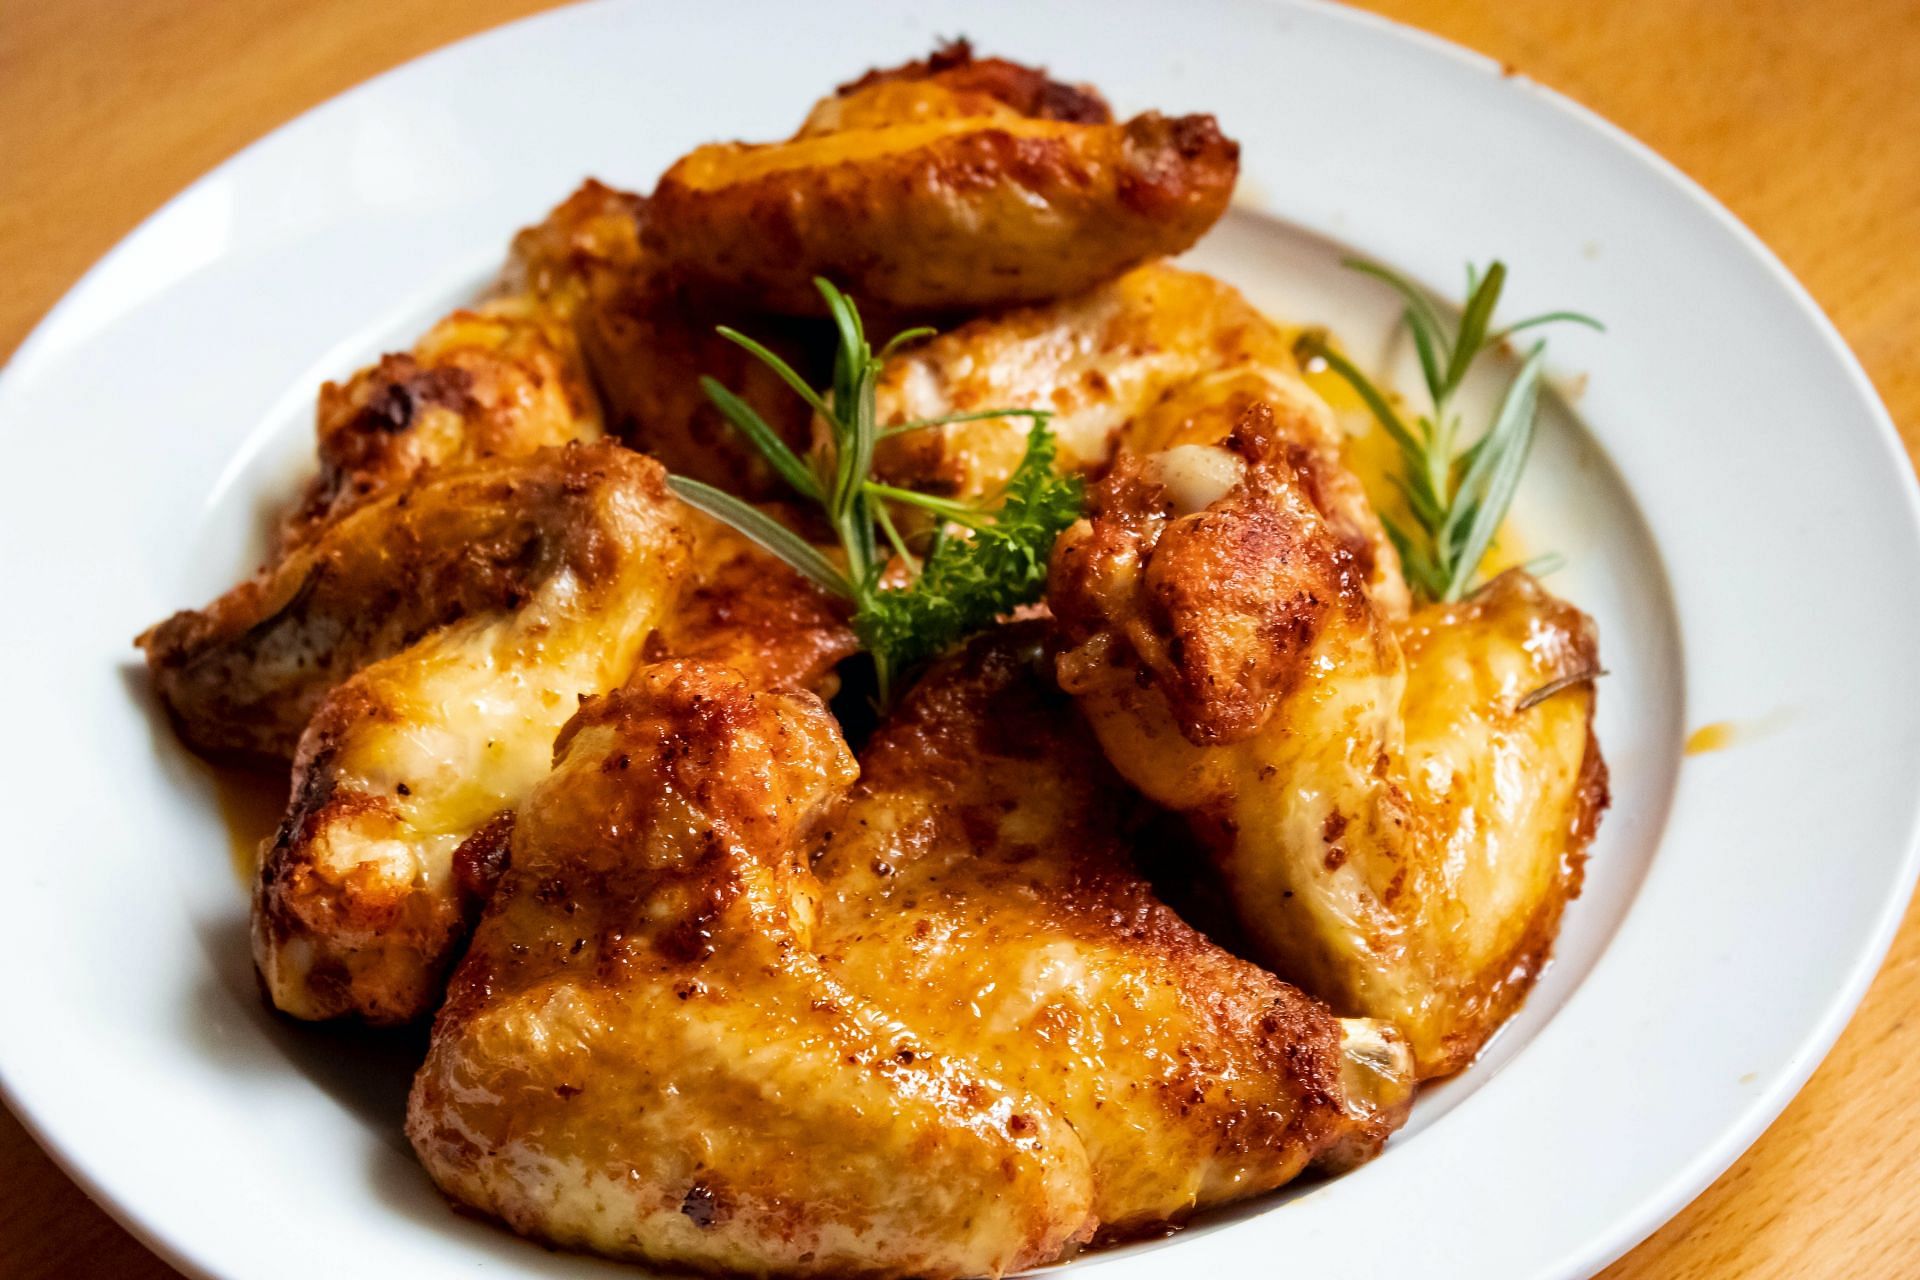 Chicken is also a good source of collagen. (Image via Pexels/Harry Dona)